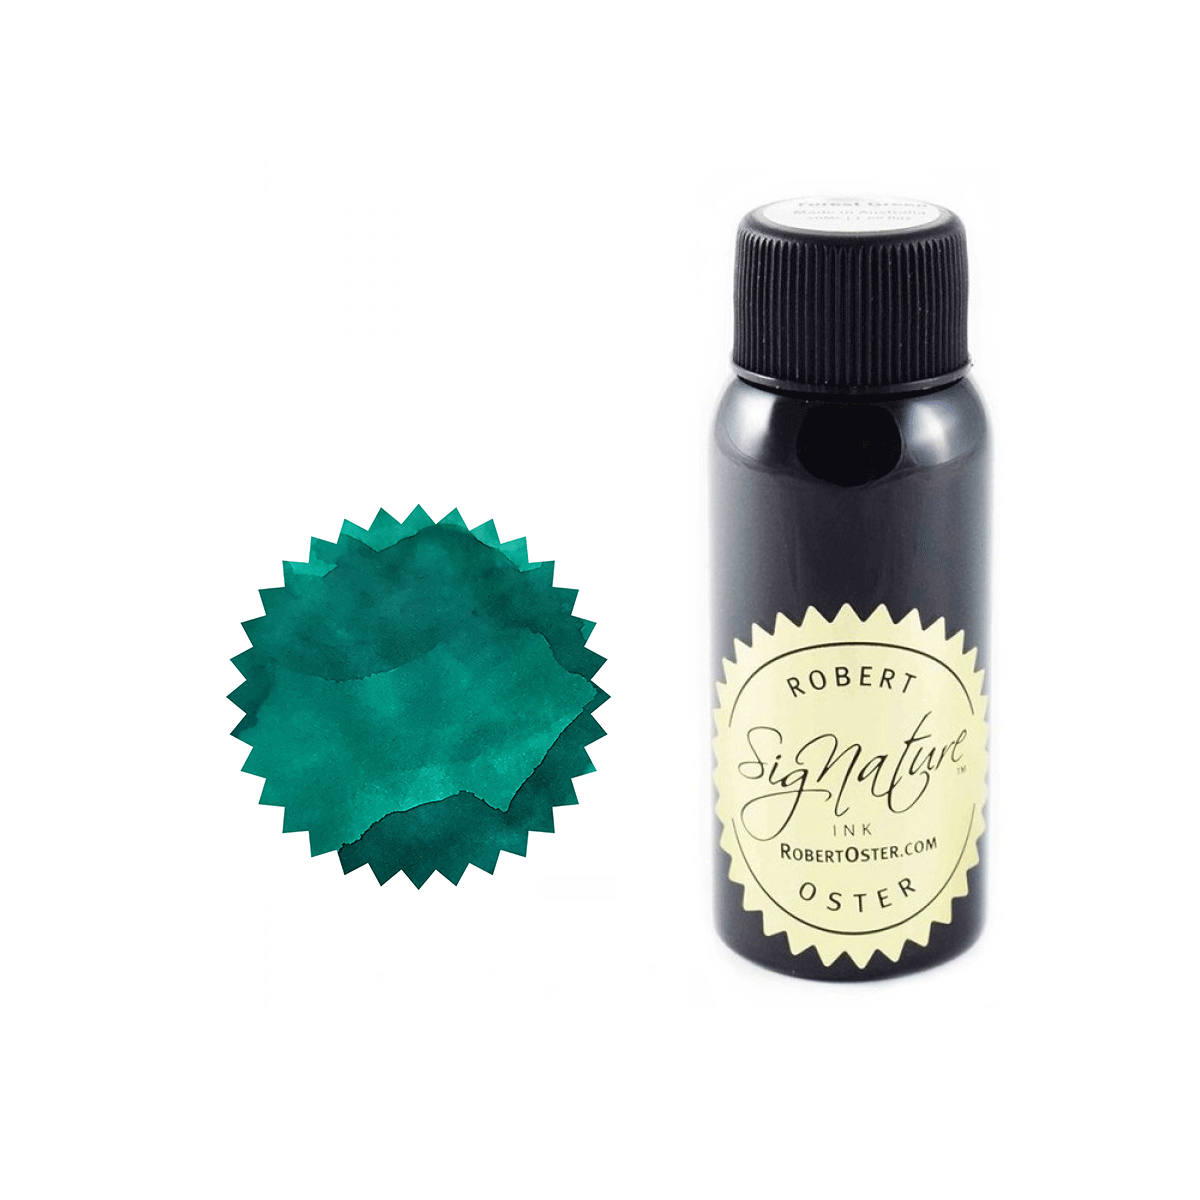 Robert Oster Signature Ink Bottle Peppermint - Pencraft the boutique